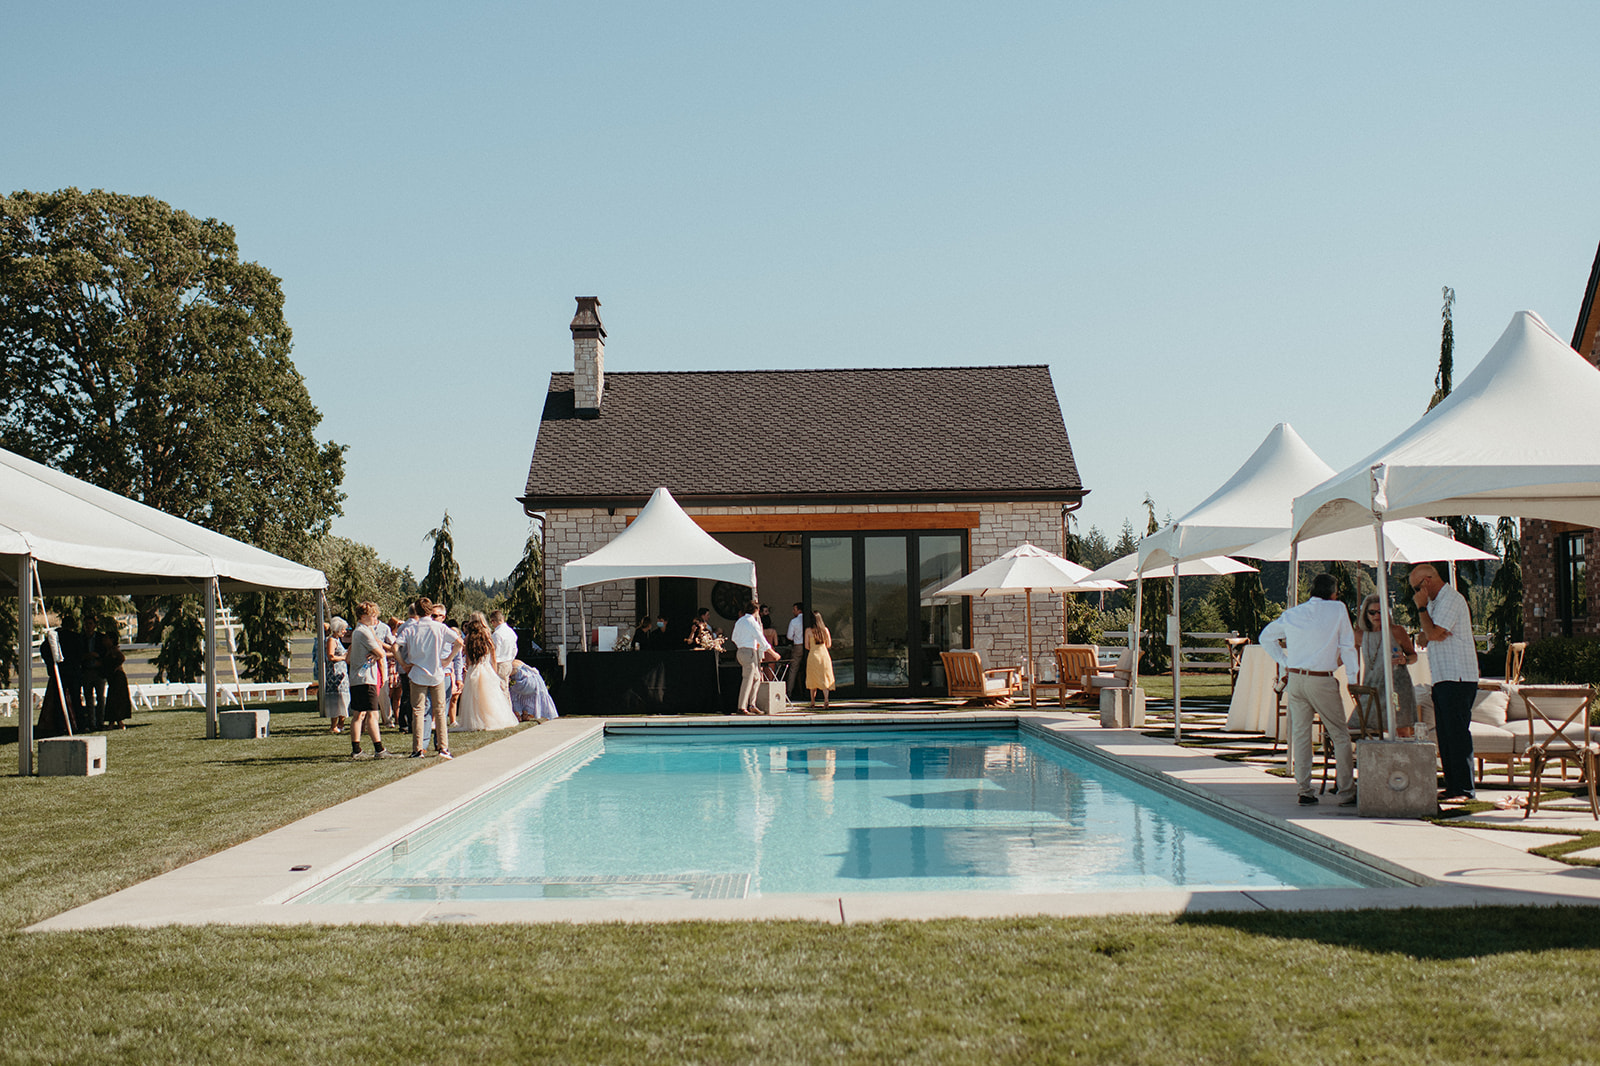 Outdoor private property wedding, cocktail reception around a pool. Backyard wedding with pool